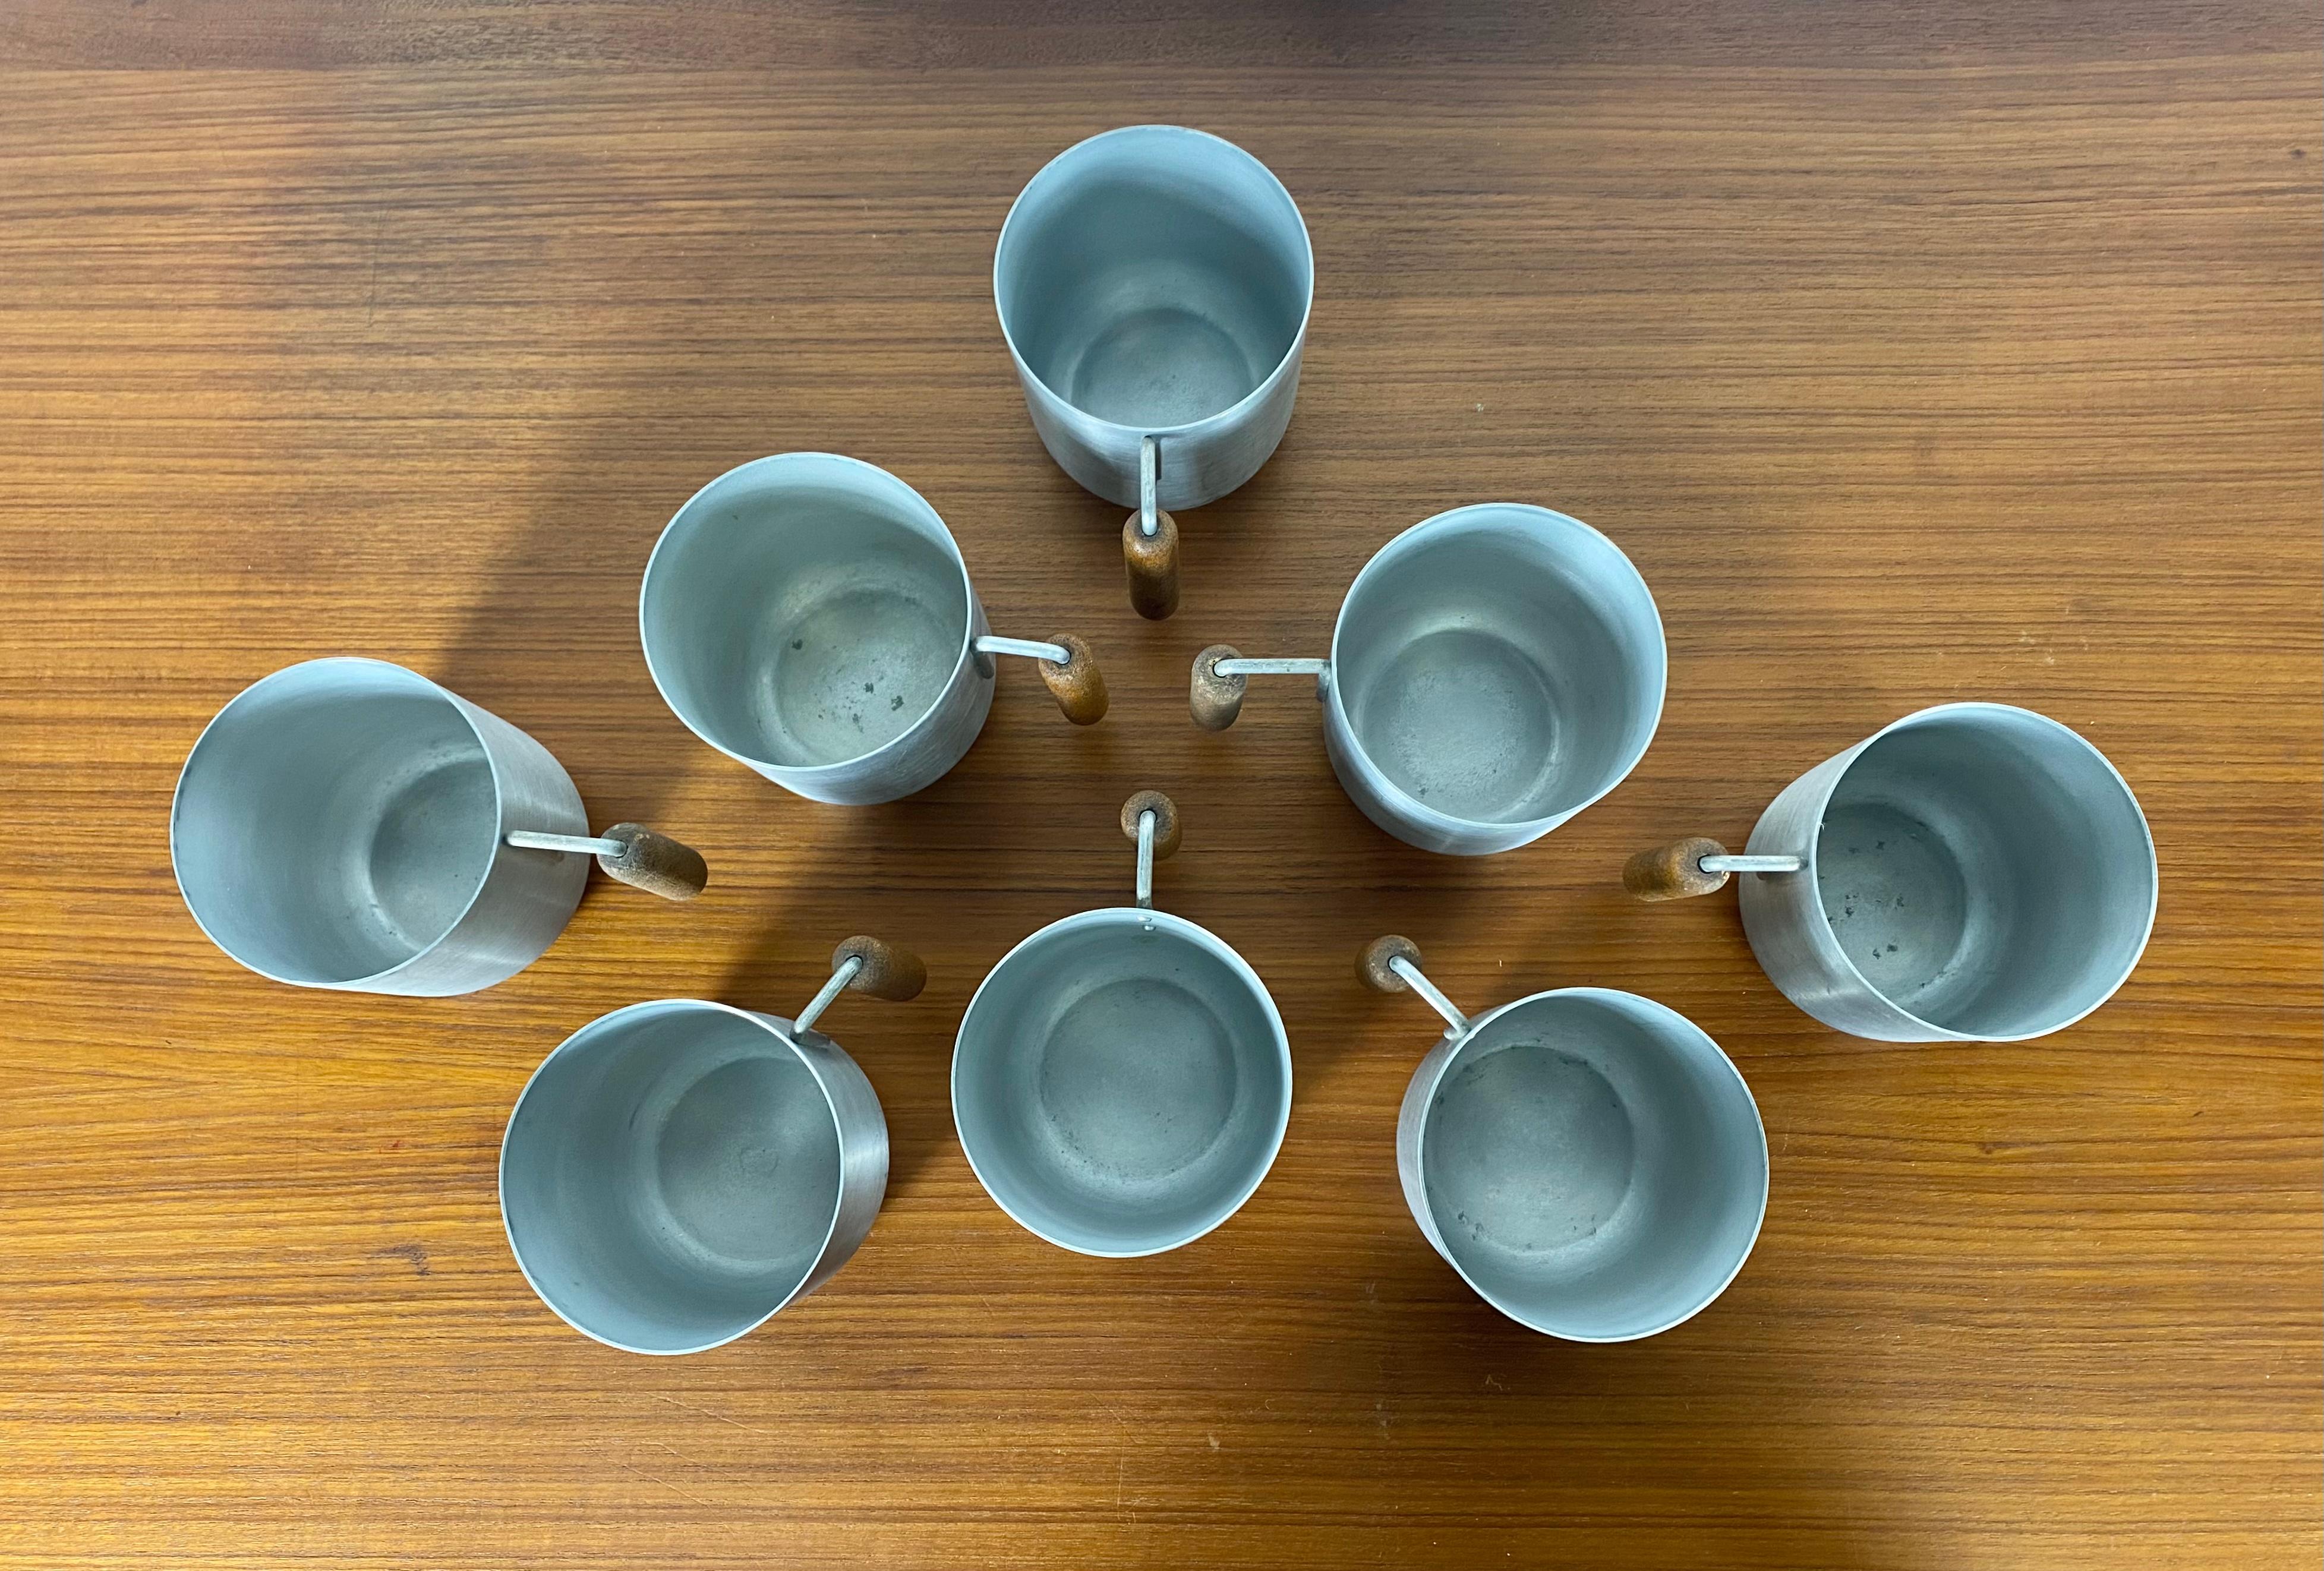 Rare Russel Wright Spun Aluminum and Cork Tankards / Mugs Set '8' In Good Condition For Sale In Buffalo, NY